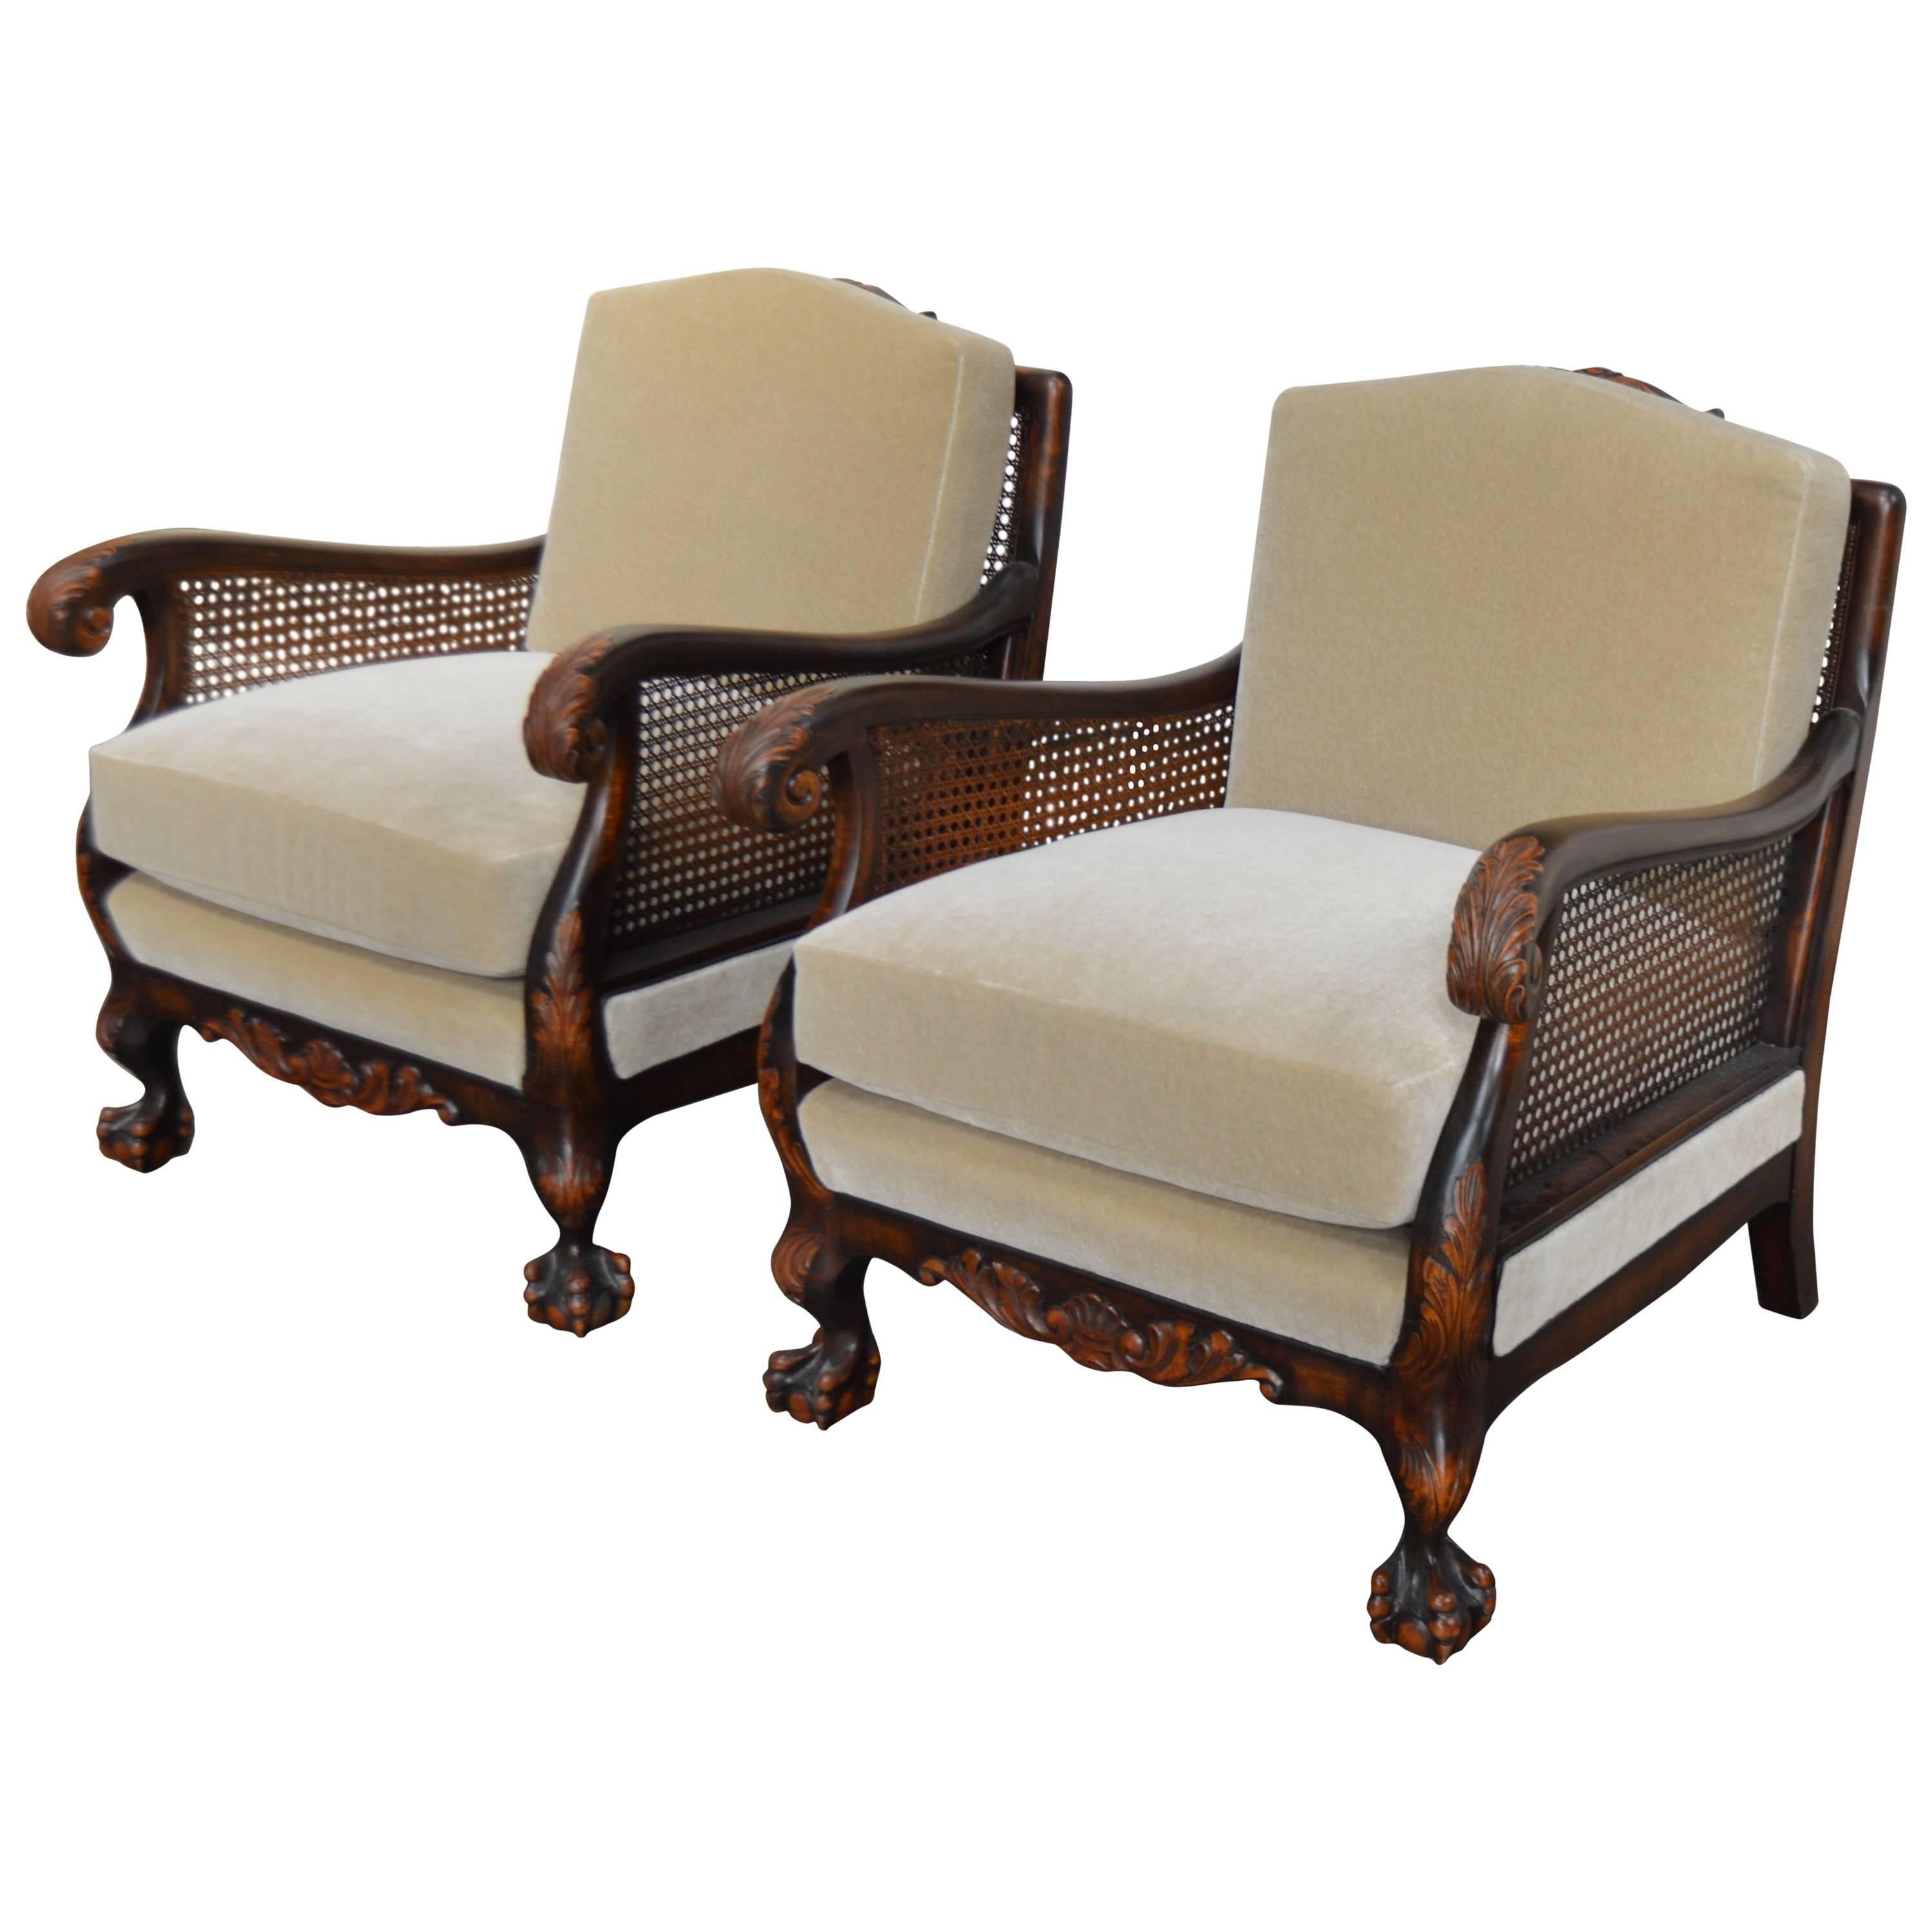 Pair of Swedish Neoclassical Caned Flame Birch Mohair Club Chairs